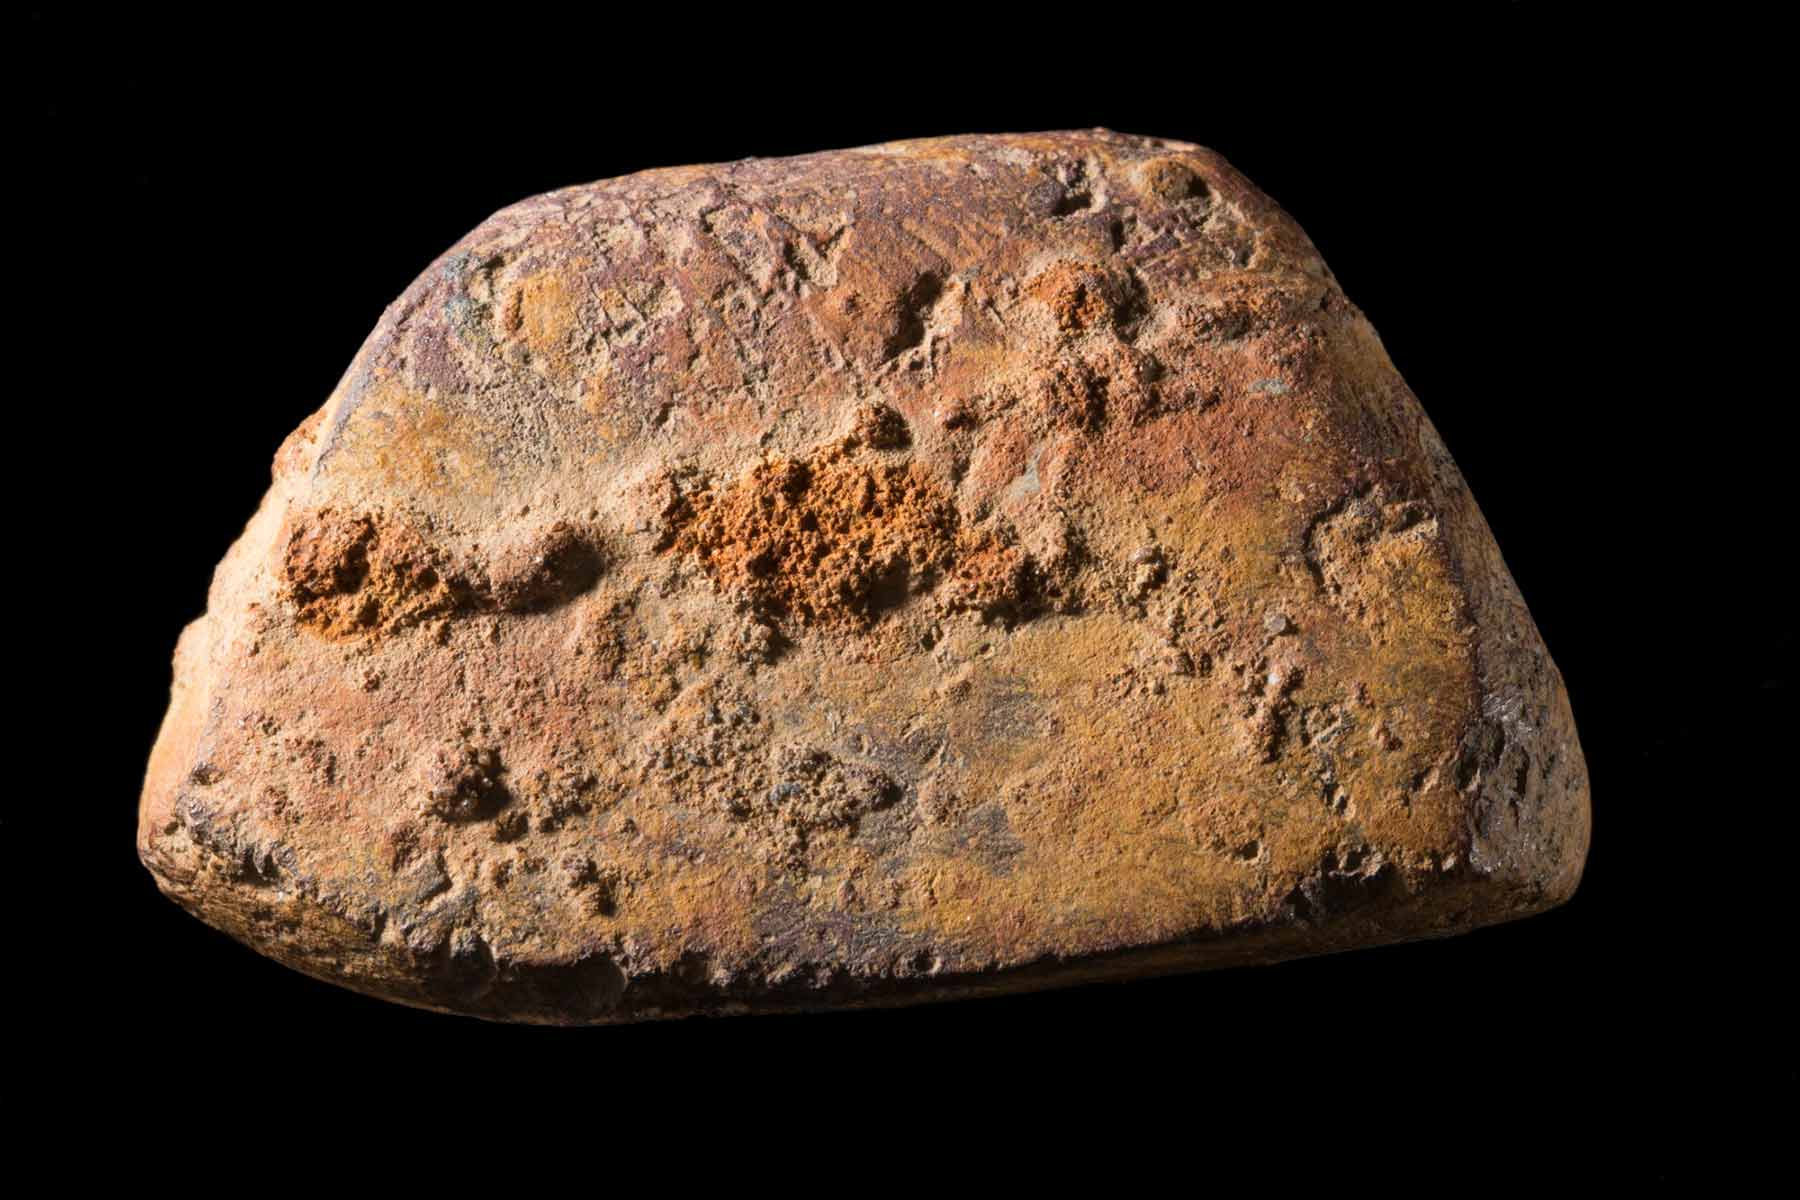 Photograph of a piece of ochre on a black background.